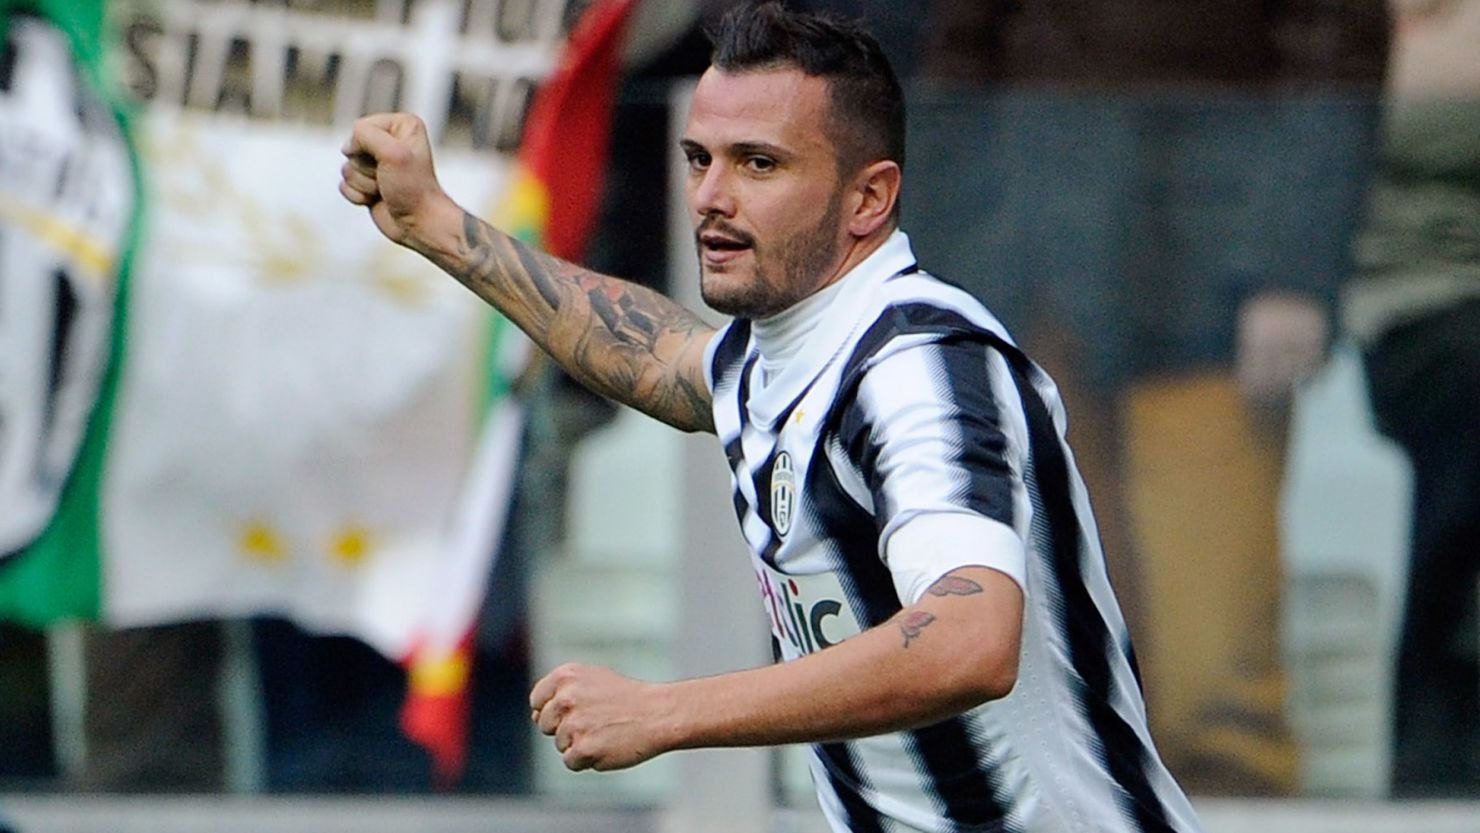 Simone Pepe opened the scoring for Juventus as they cruised back to the top of the Serie A table.